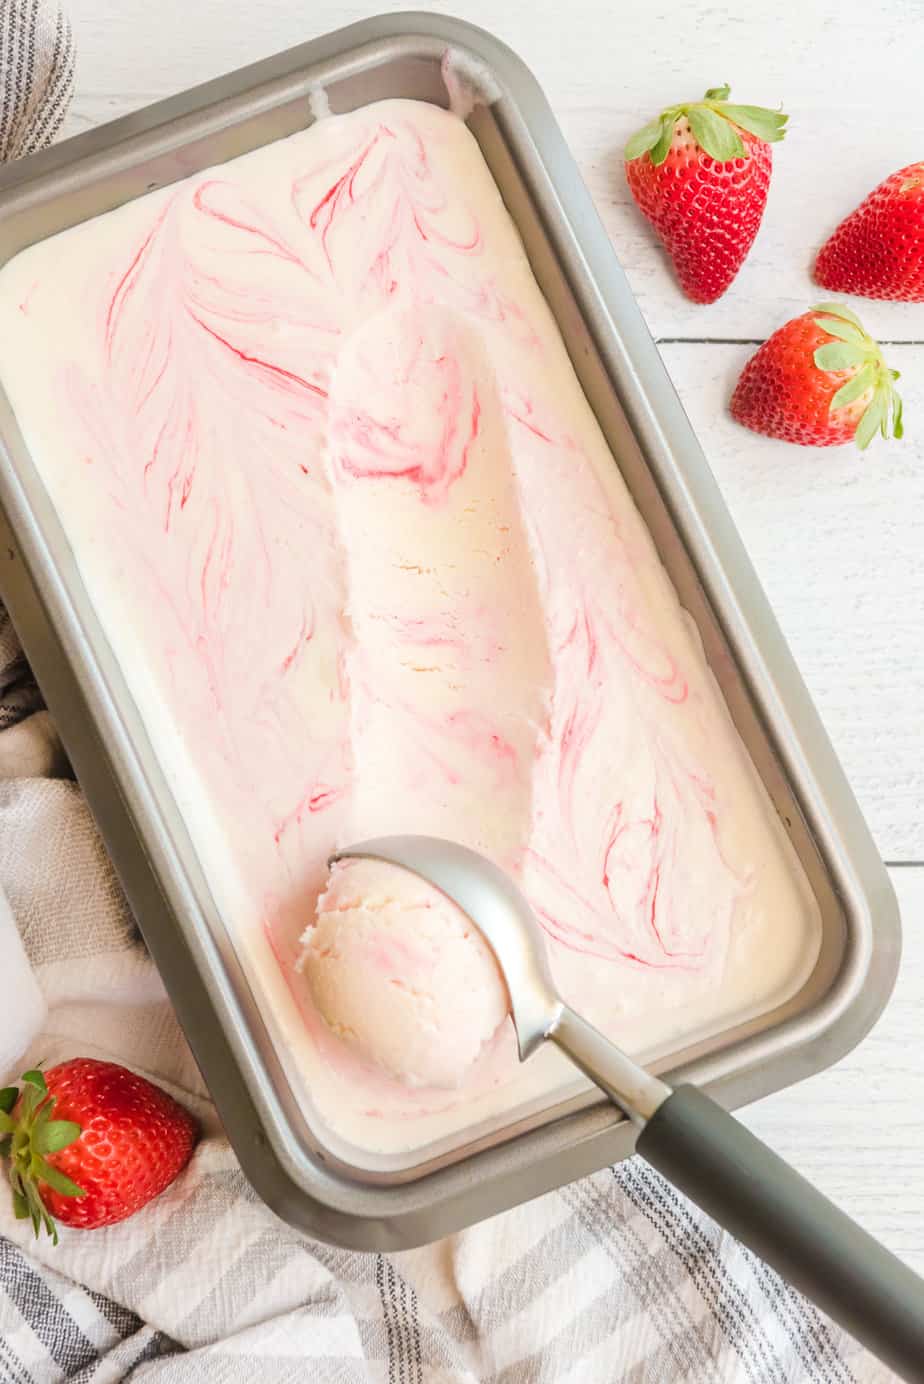 Vanilla ice cream with strawberry swirled through it being scooped out of a pan from overhead.